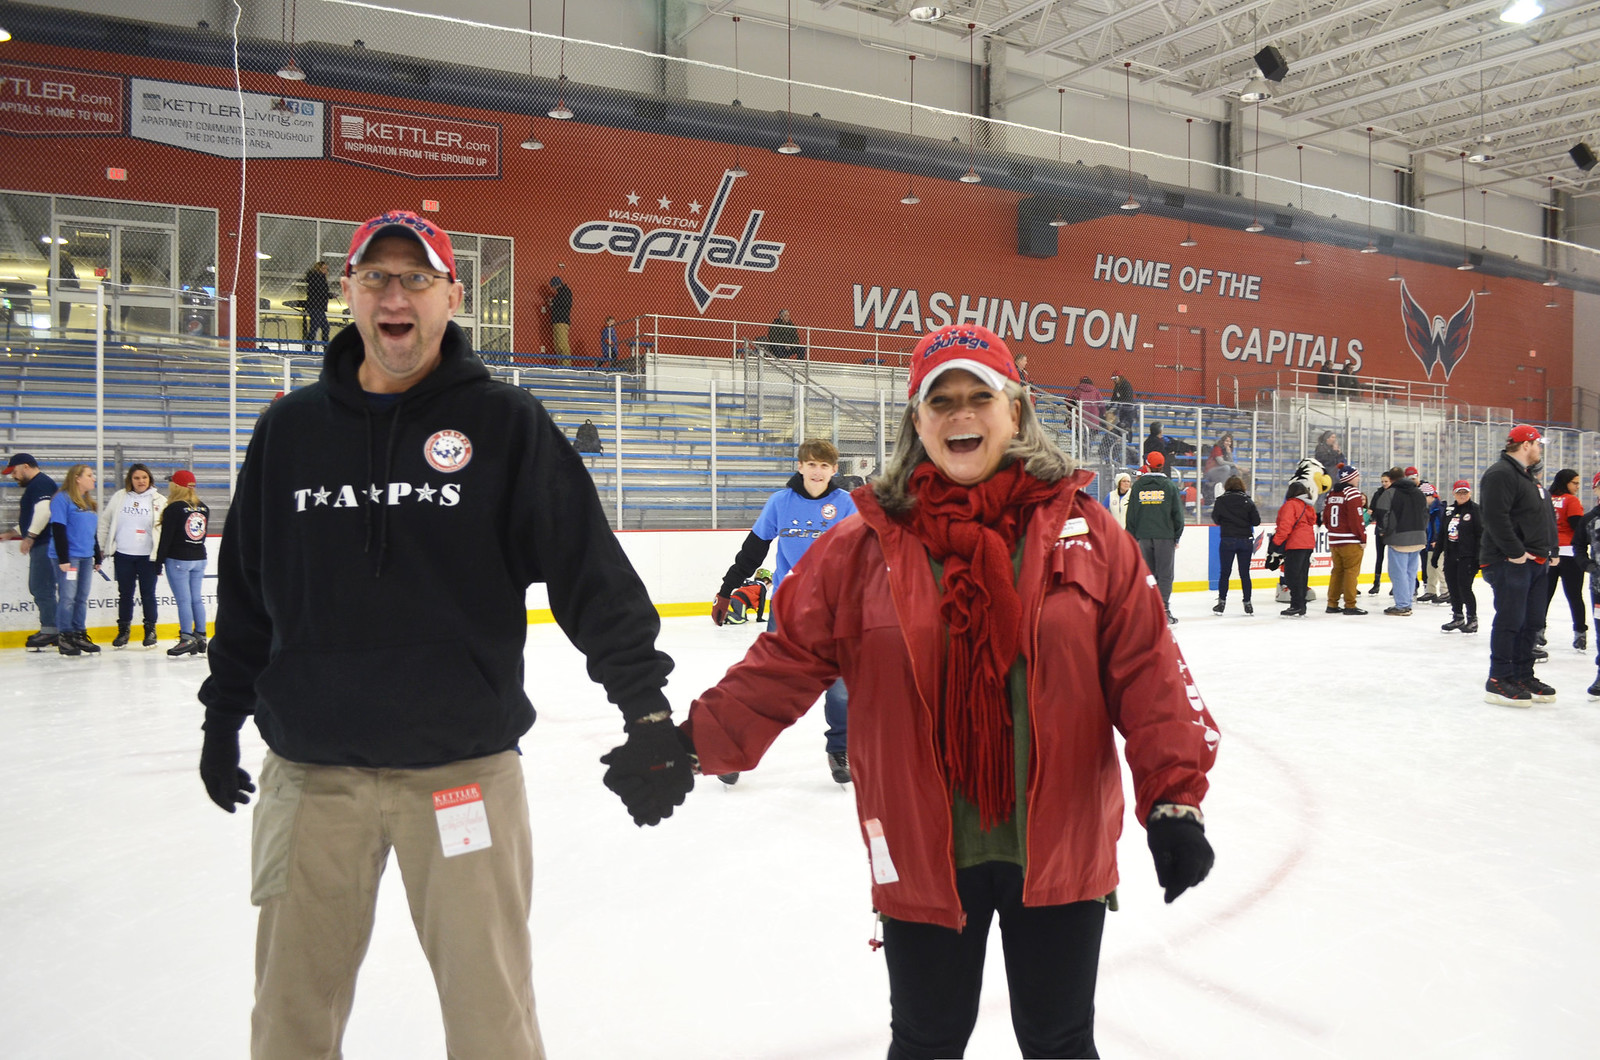 2016_T4T_Skate with Washington Capitals 23